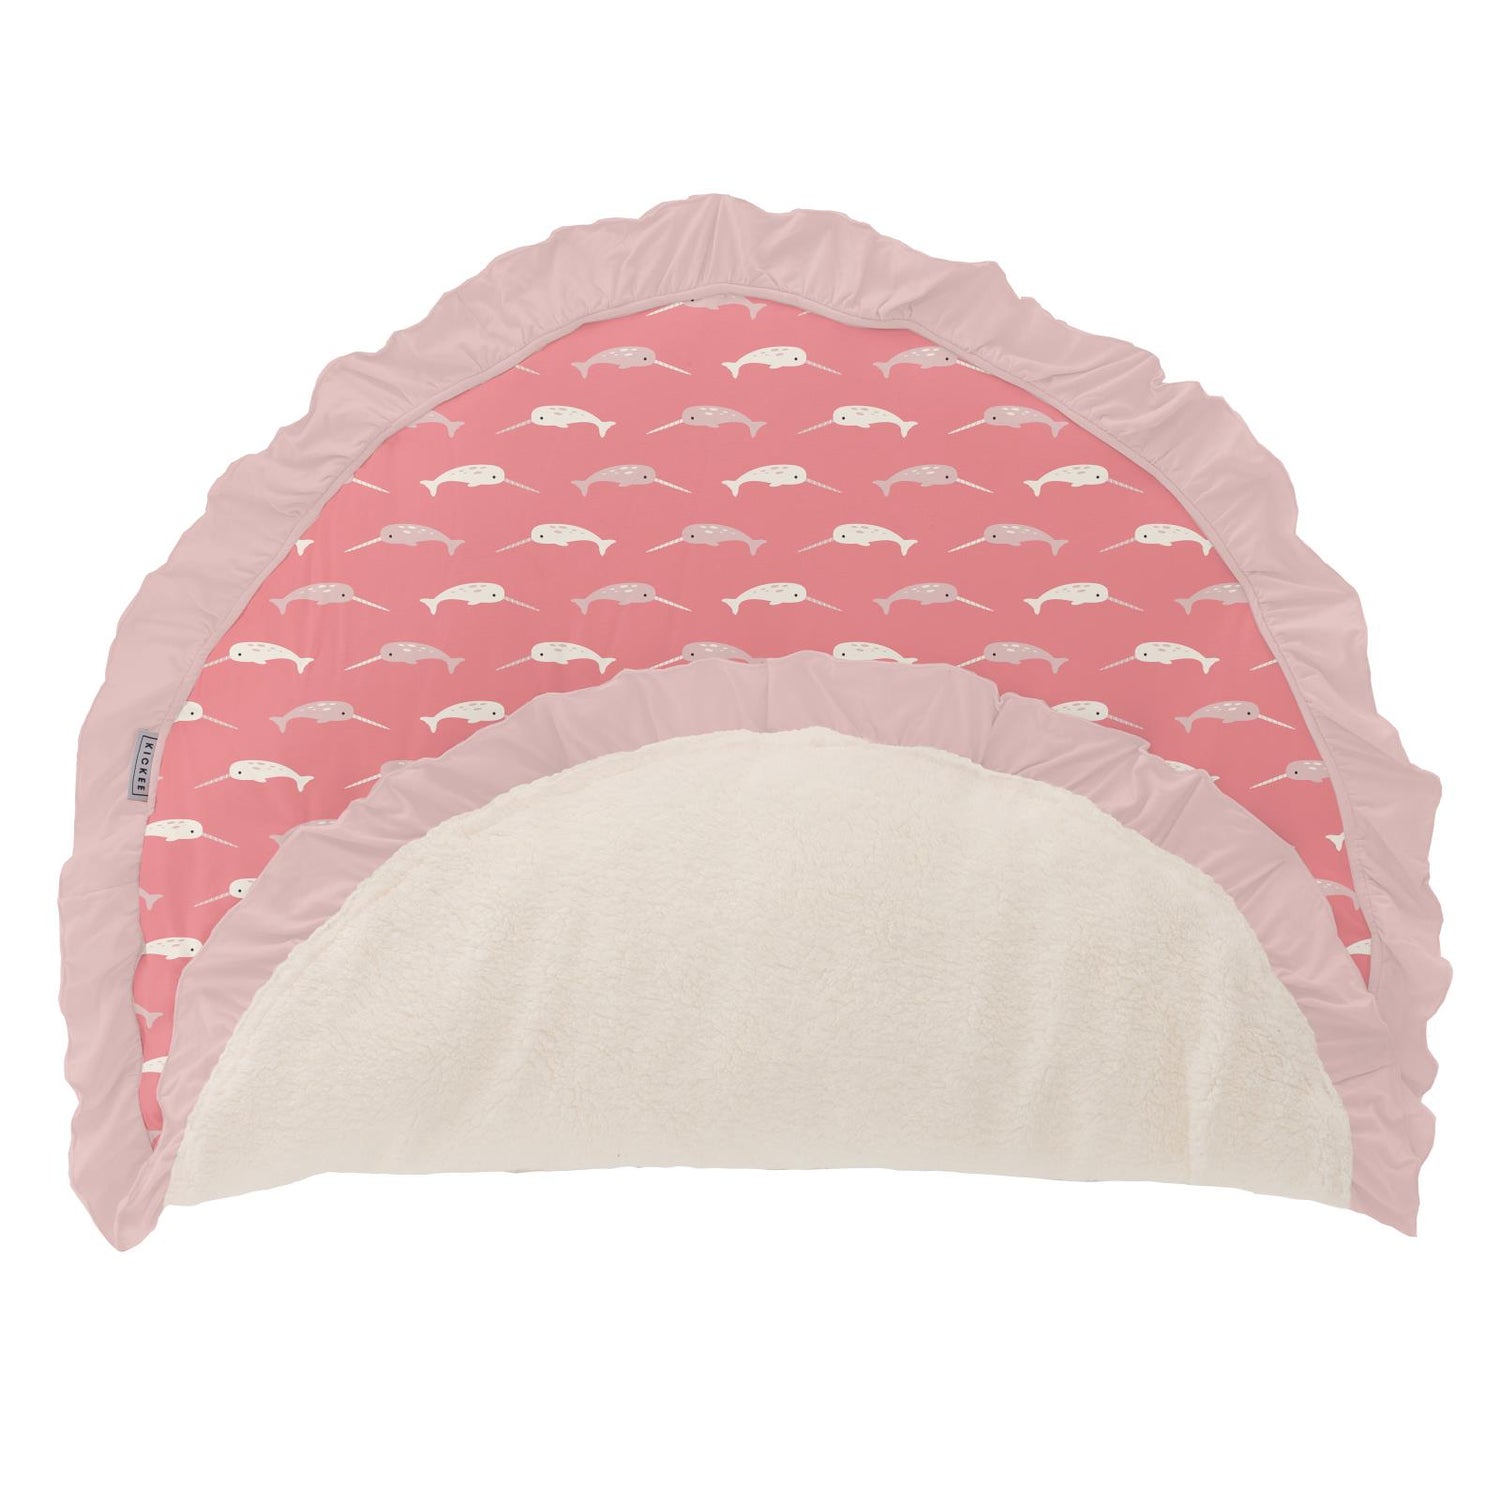 Print Sherpa-Lined Ruffle Fluffle Playmat in Strawberry Narwhal